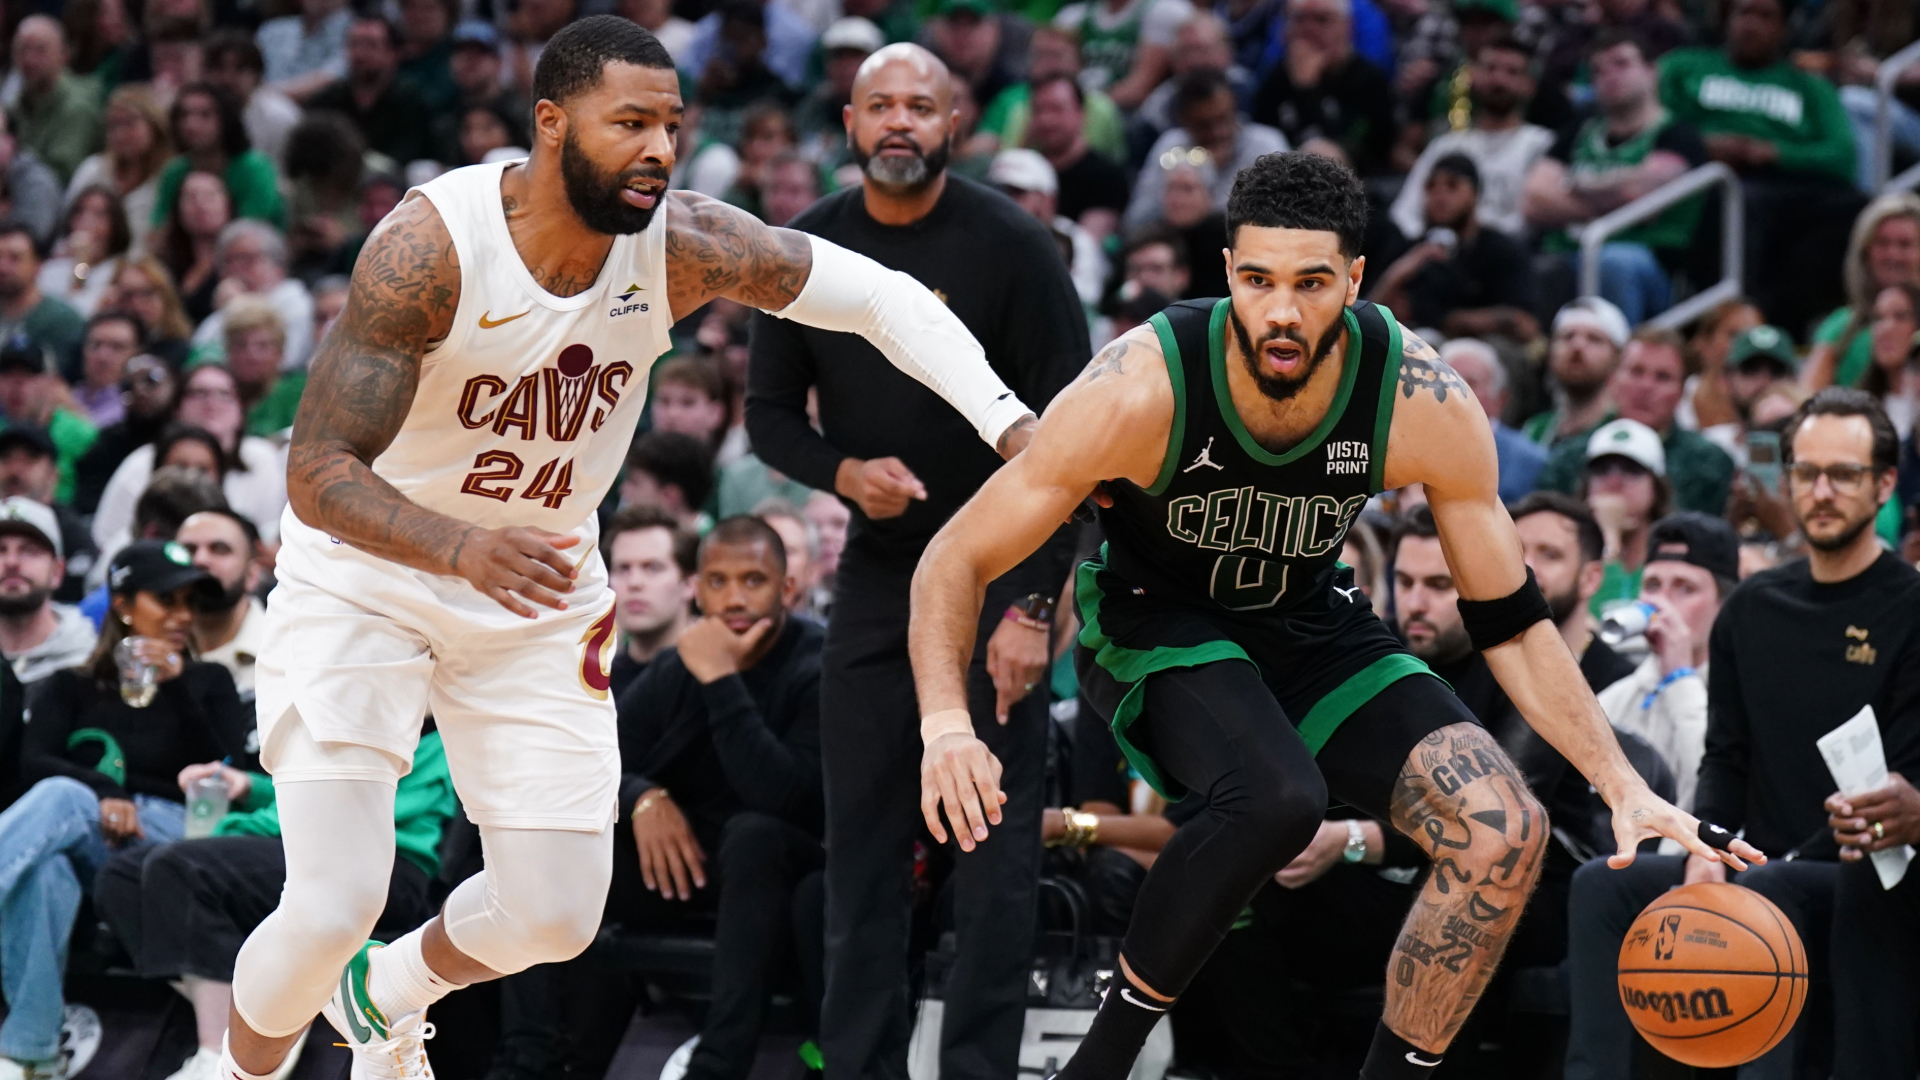 Three Takeaways After Celtics Punch Conference Finals Ticket Vs. Cavs